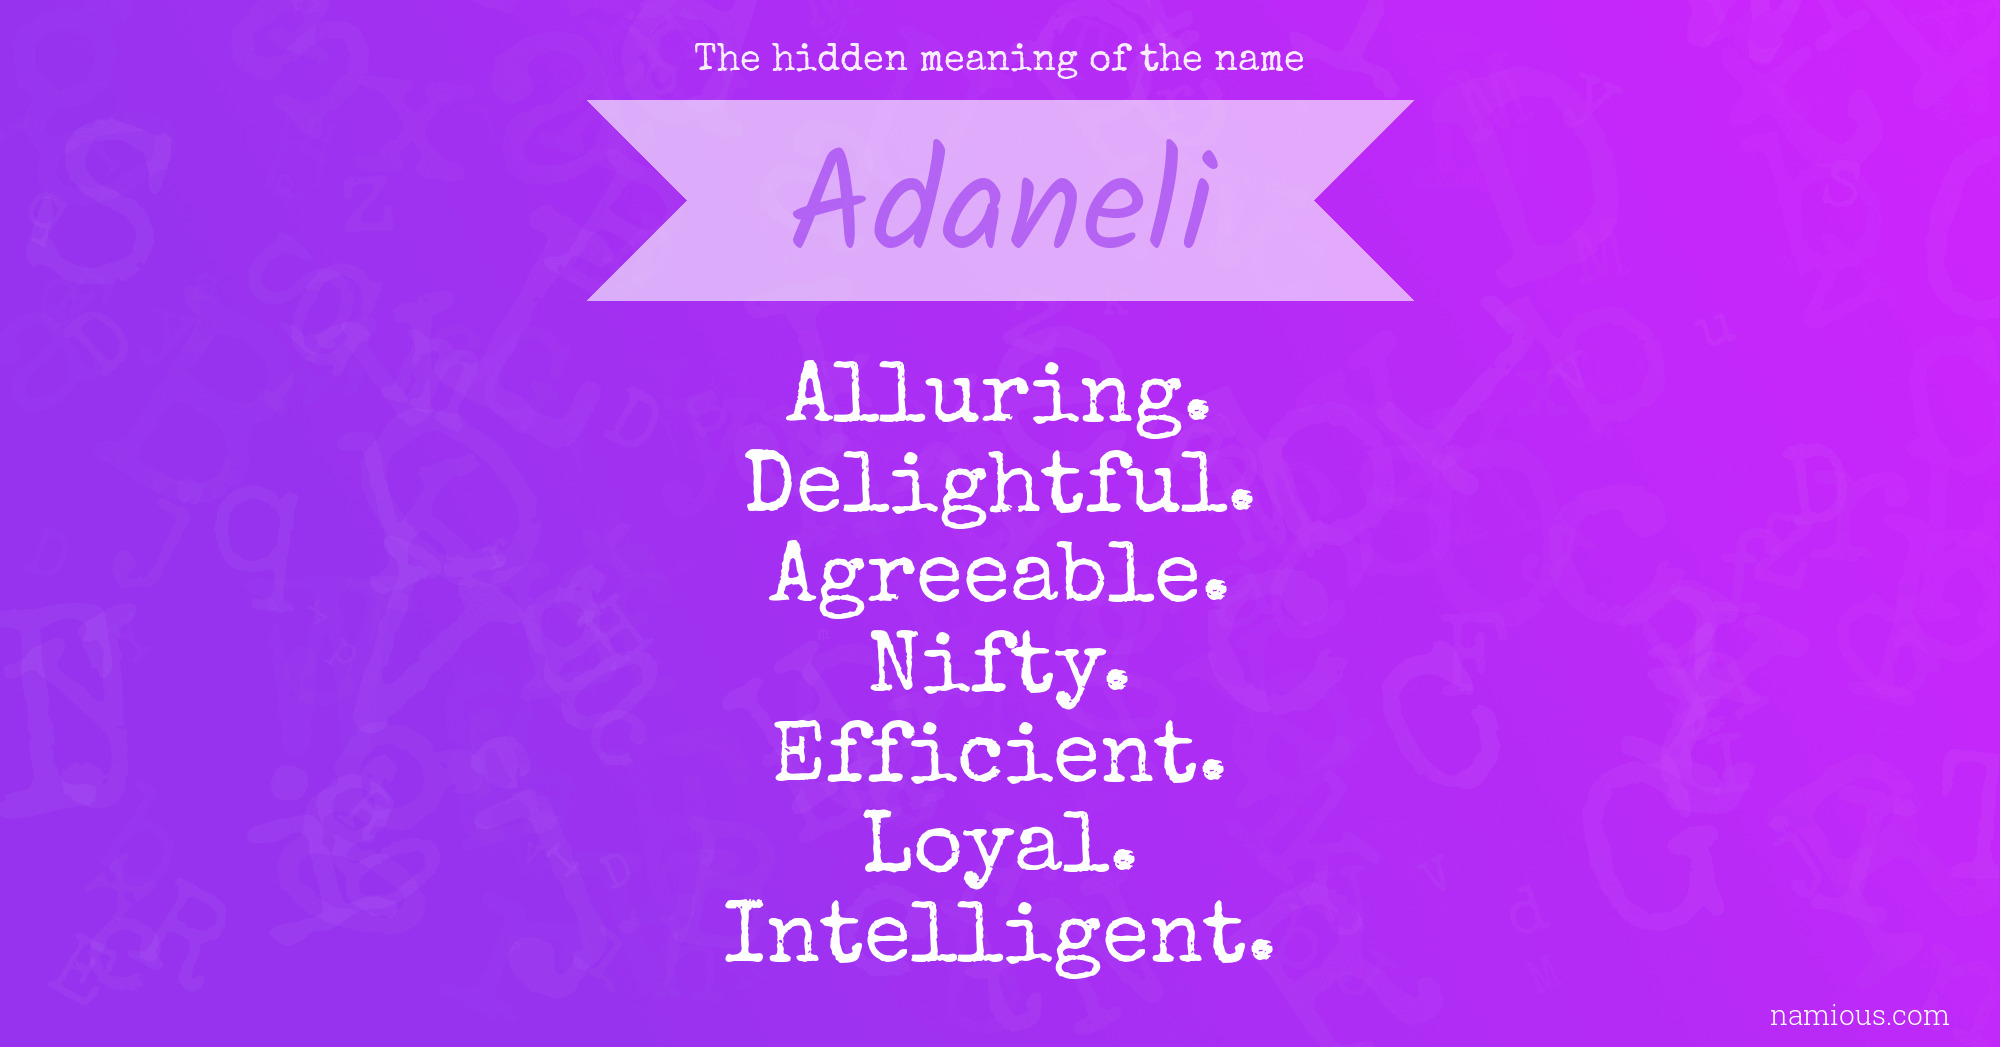 The hidden meaning of the name Adaneli